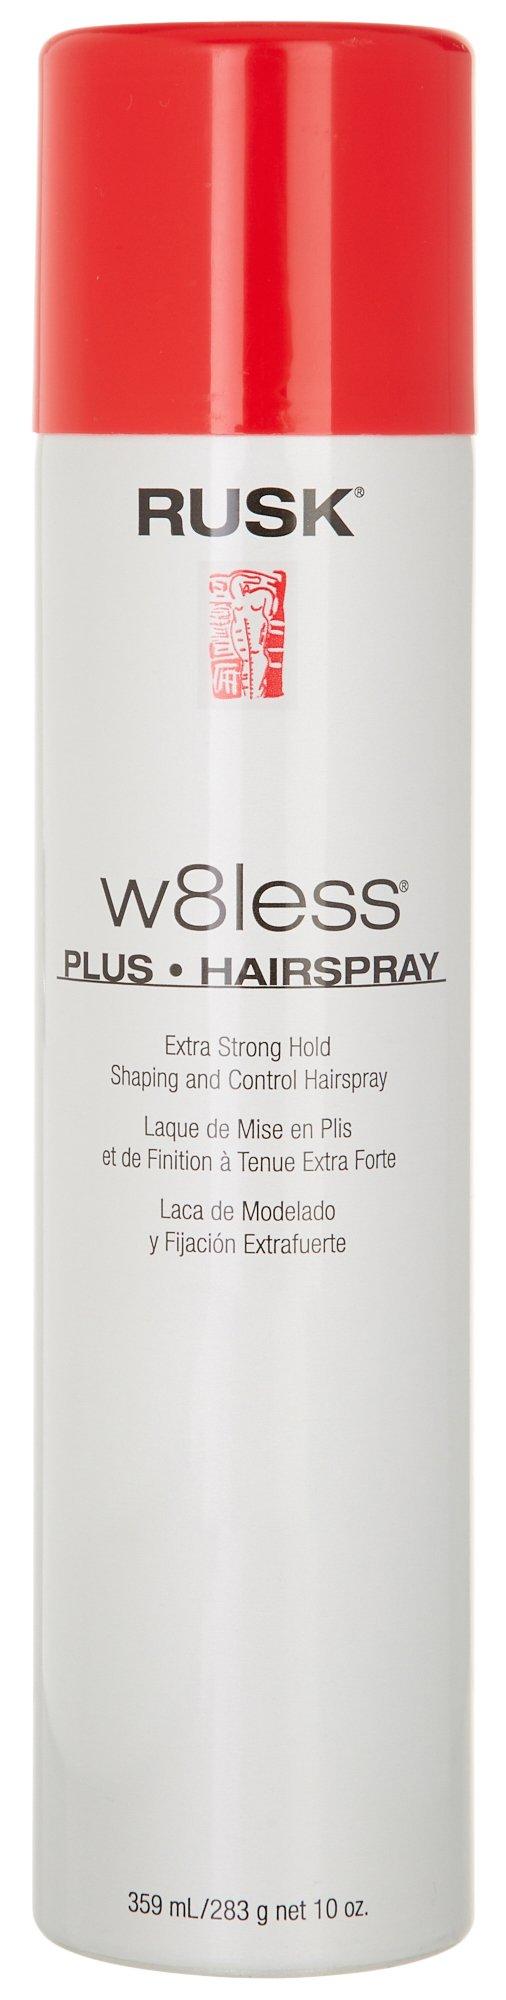 Rusk W8less Plus Extra Strong Hold Hairspray 10 oz.